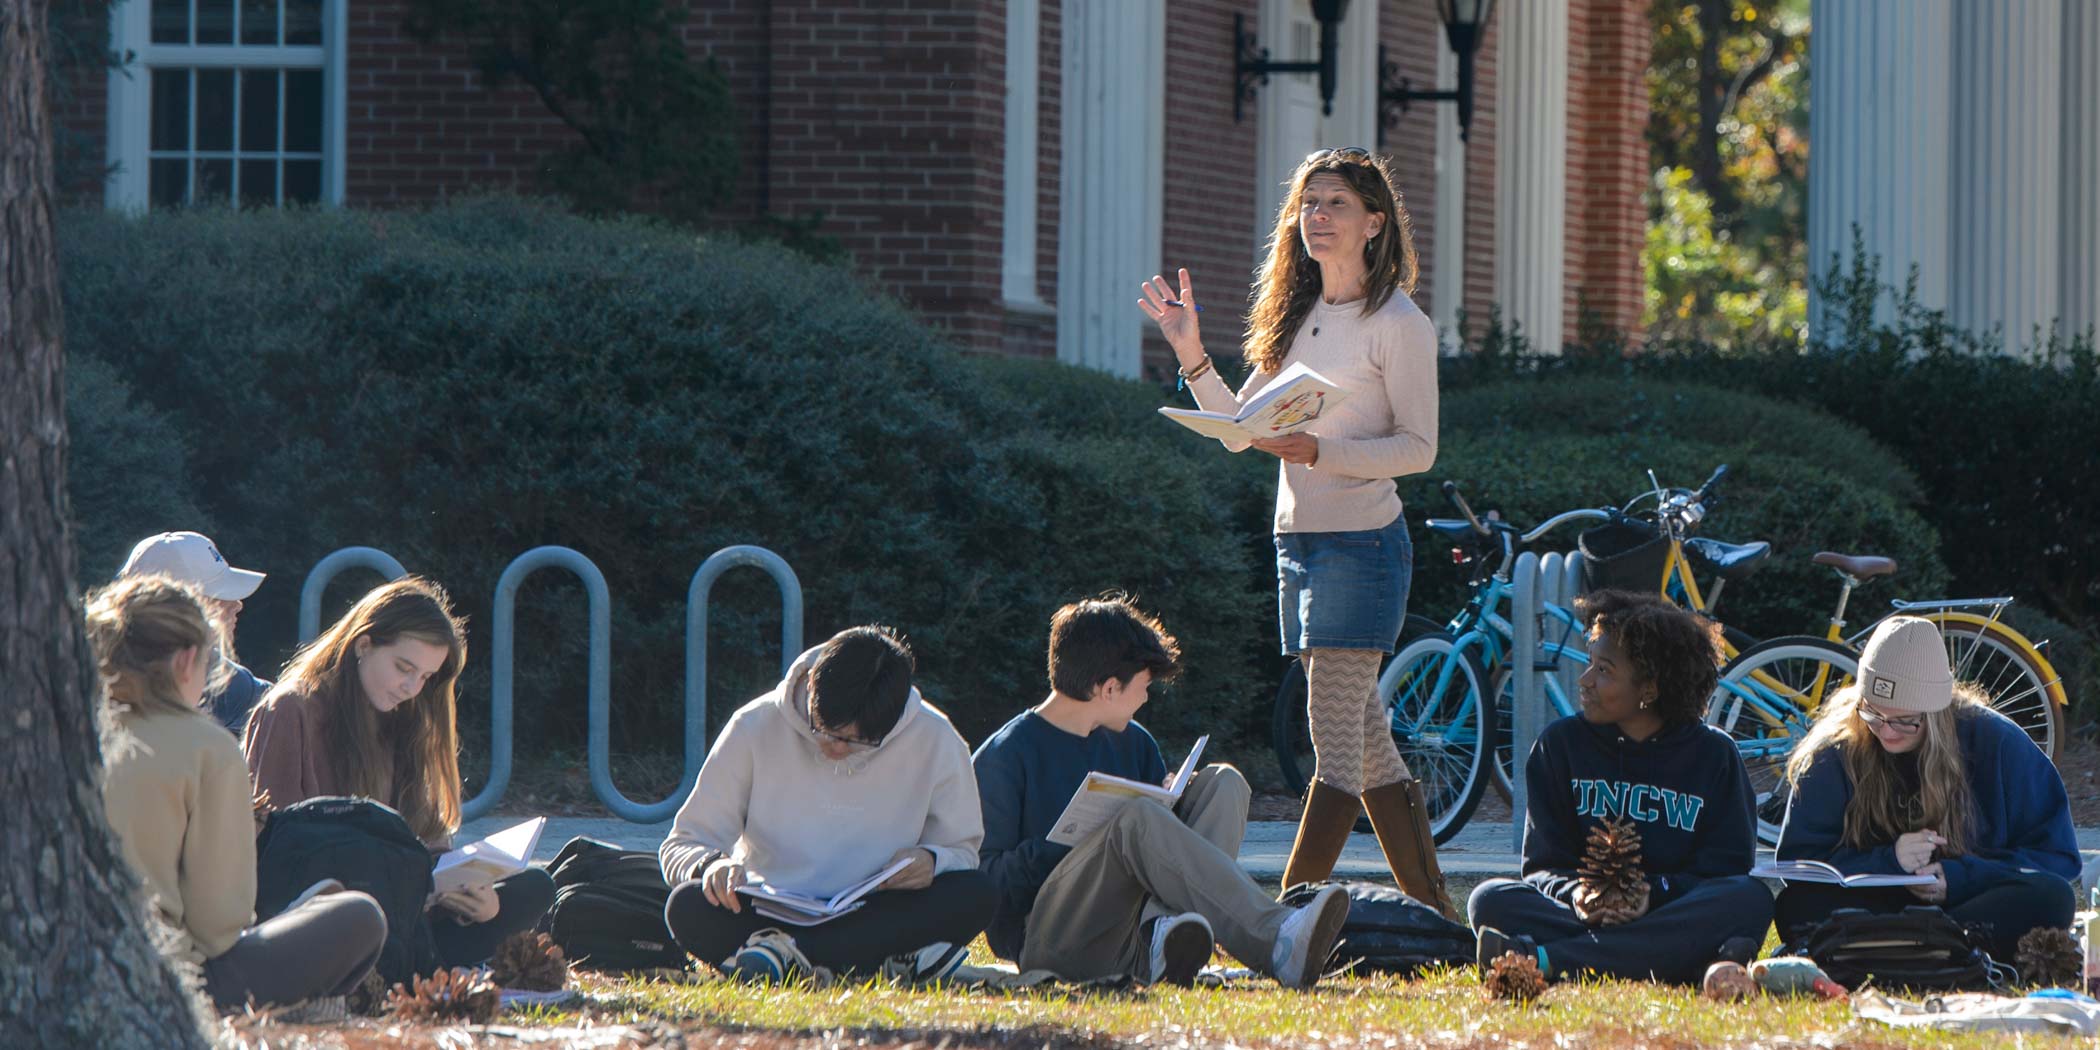 A professor reads from a book during a class outside